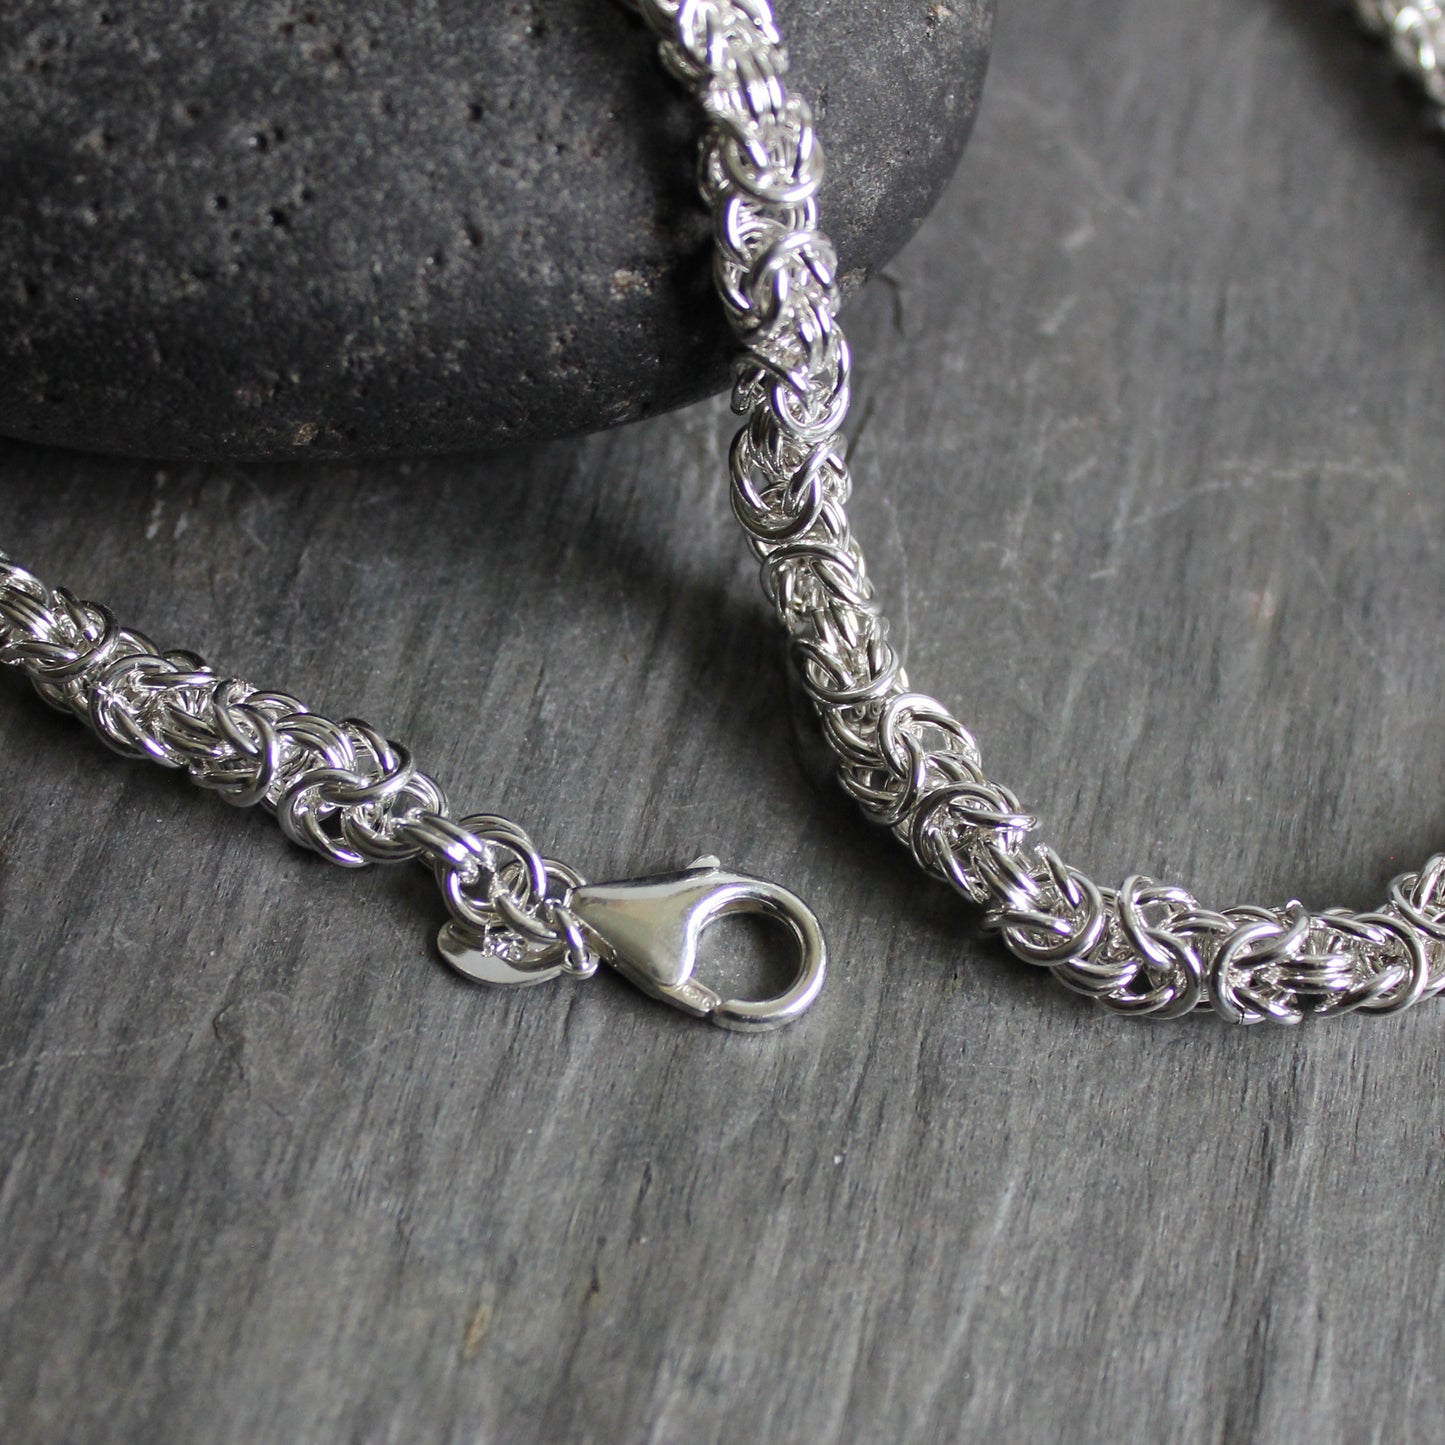 Handmade sterling silver byzantine chain handmade by Will Macy in Corvallis, OR. 